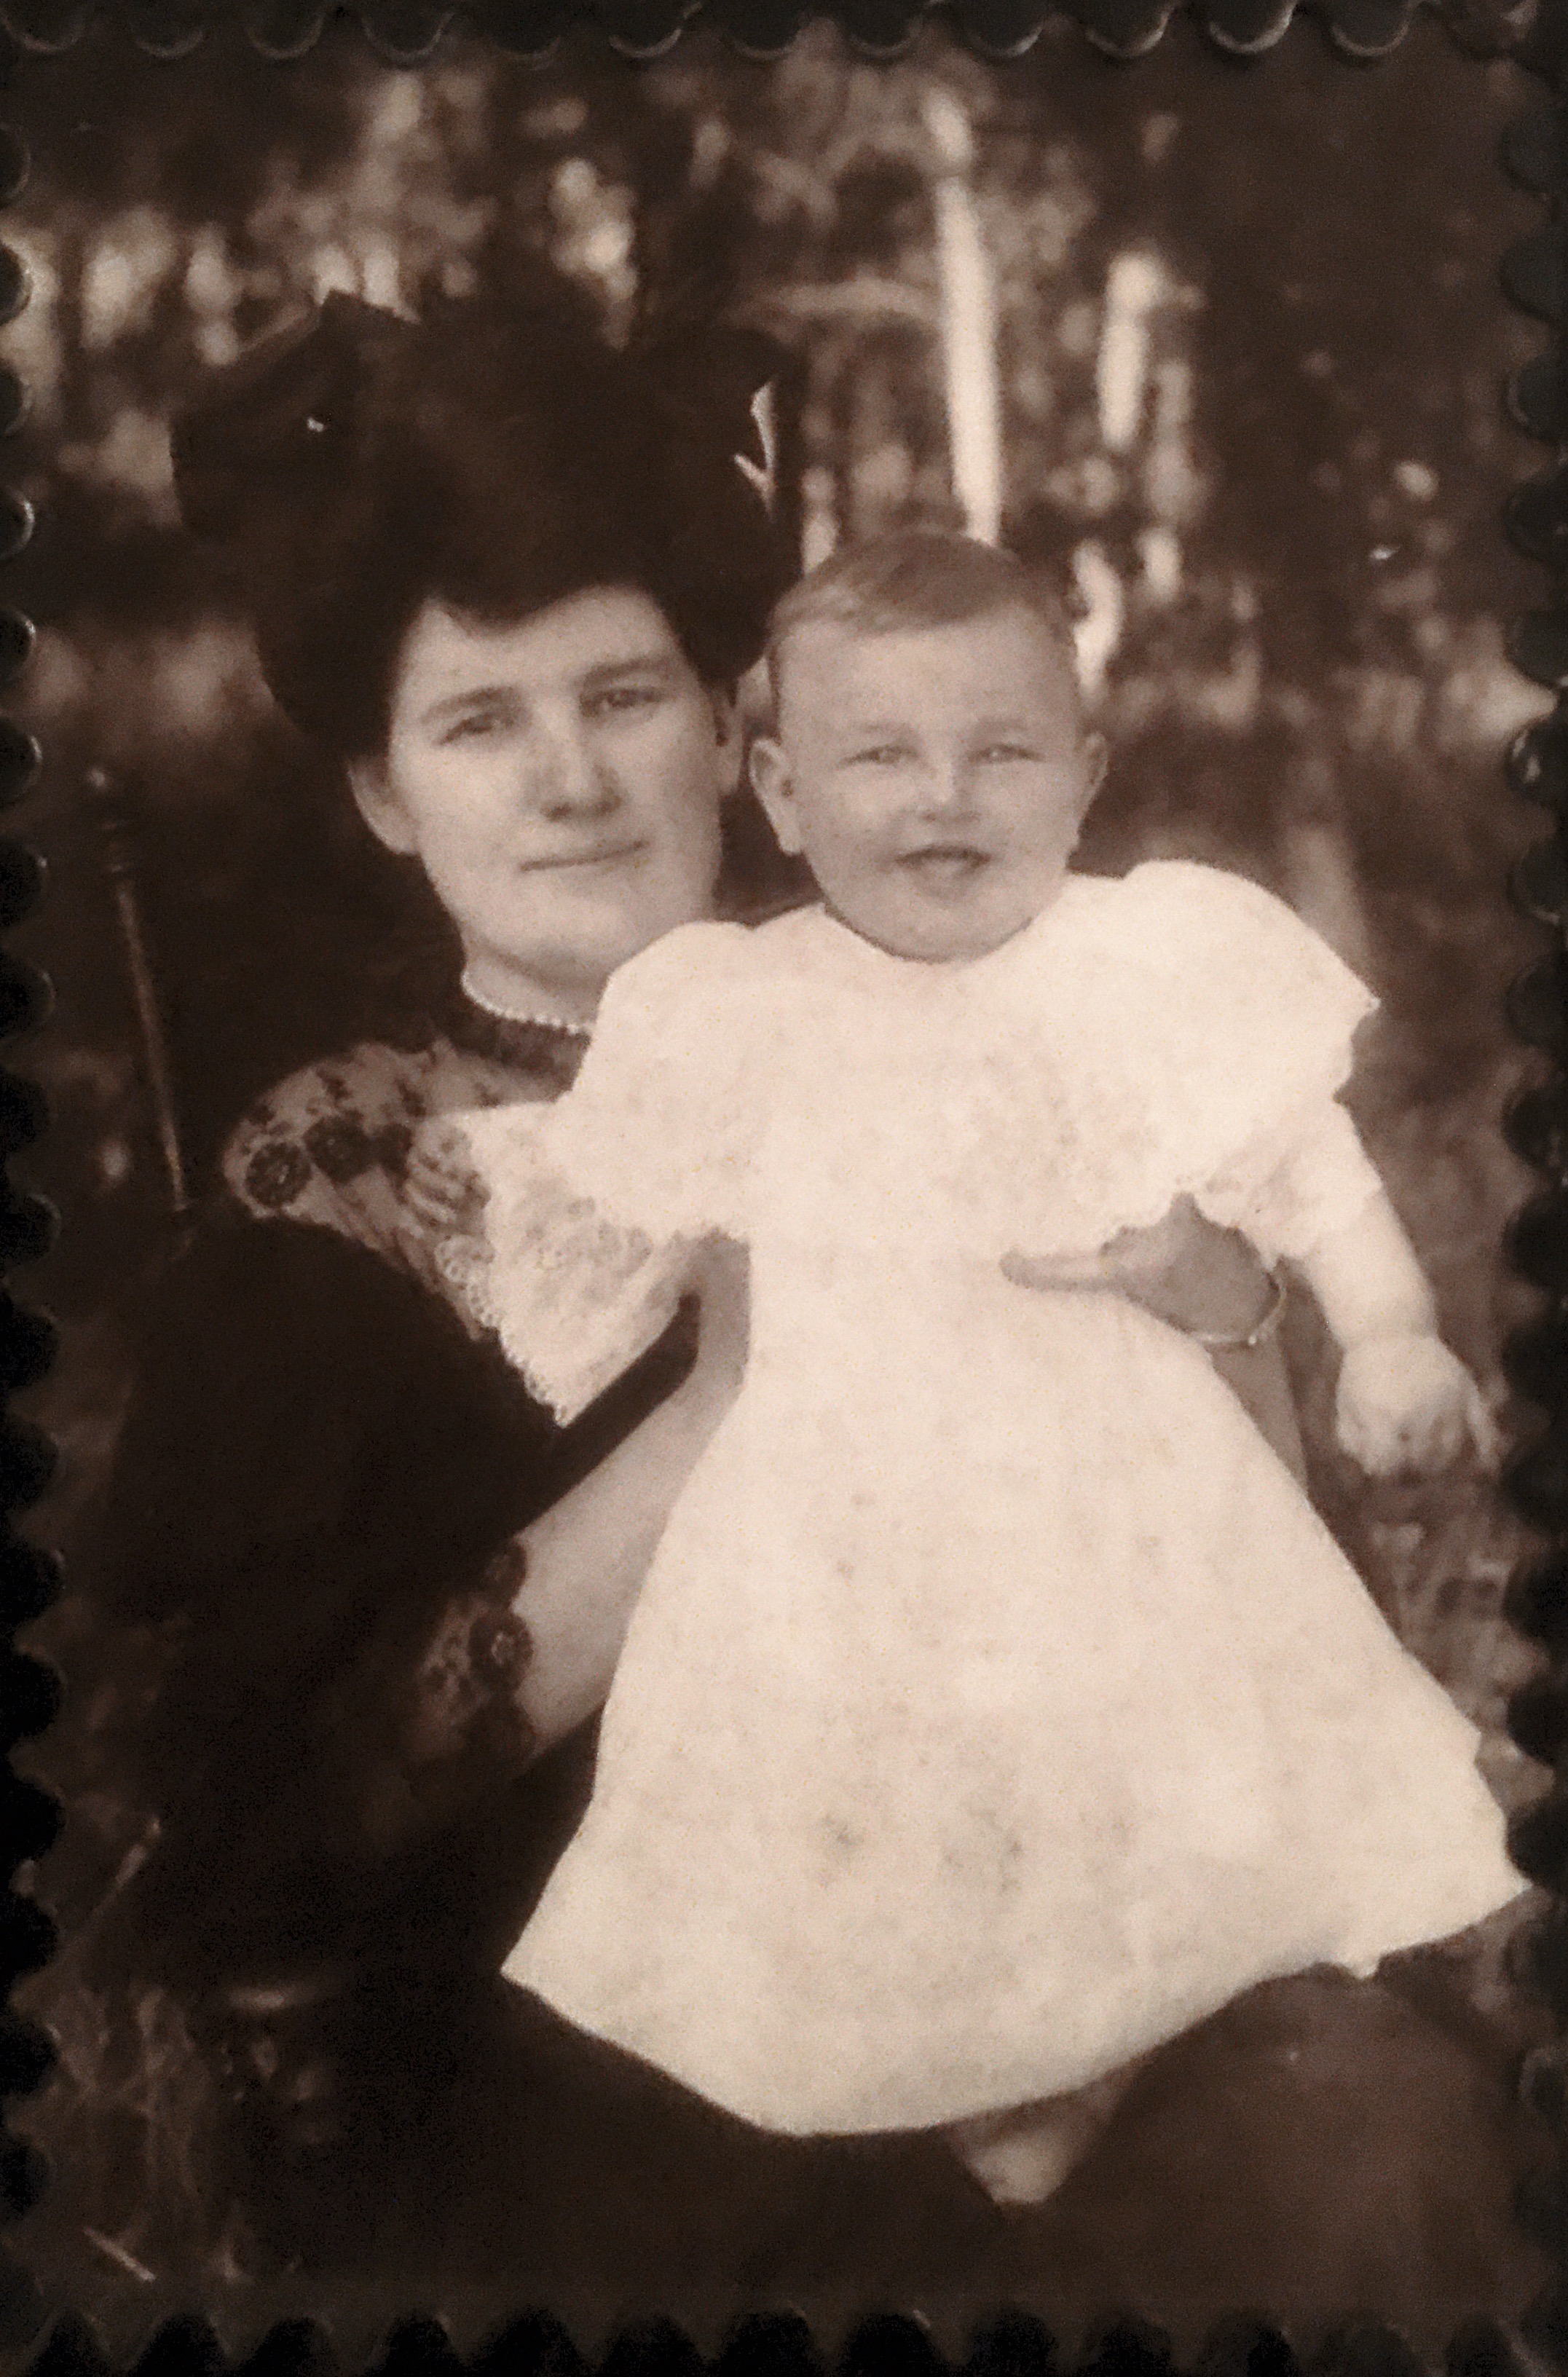 Leslie George Brink with Sophia Margaritte, his mother, approximate date 1906